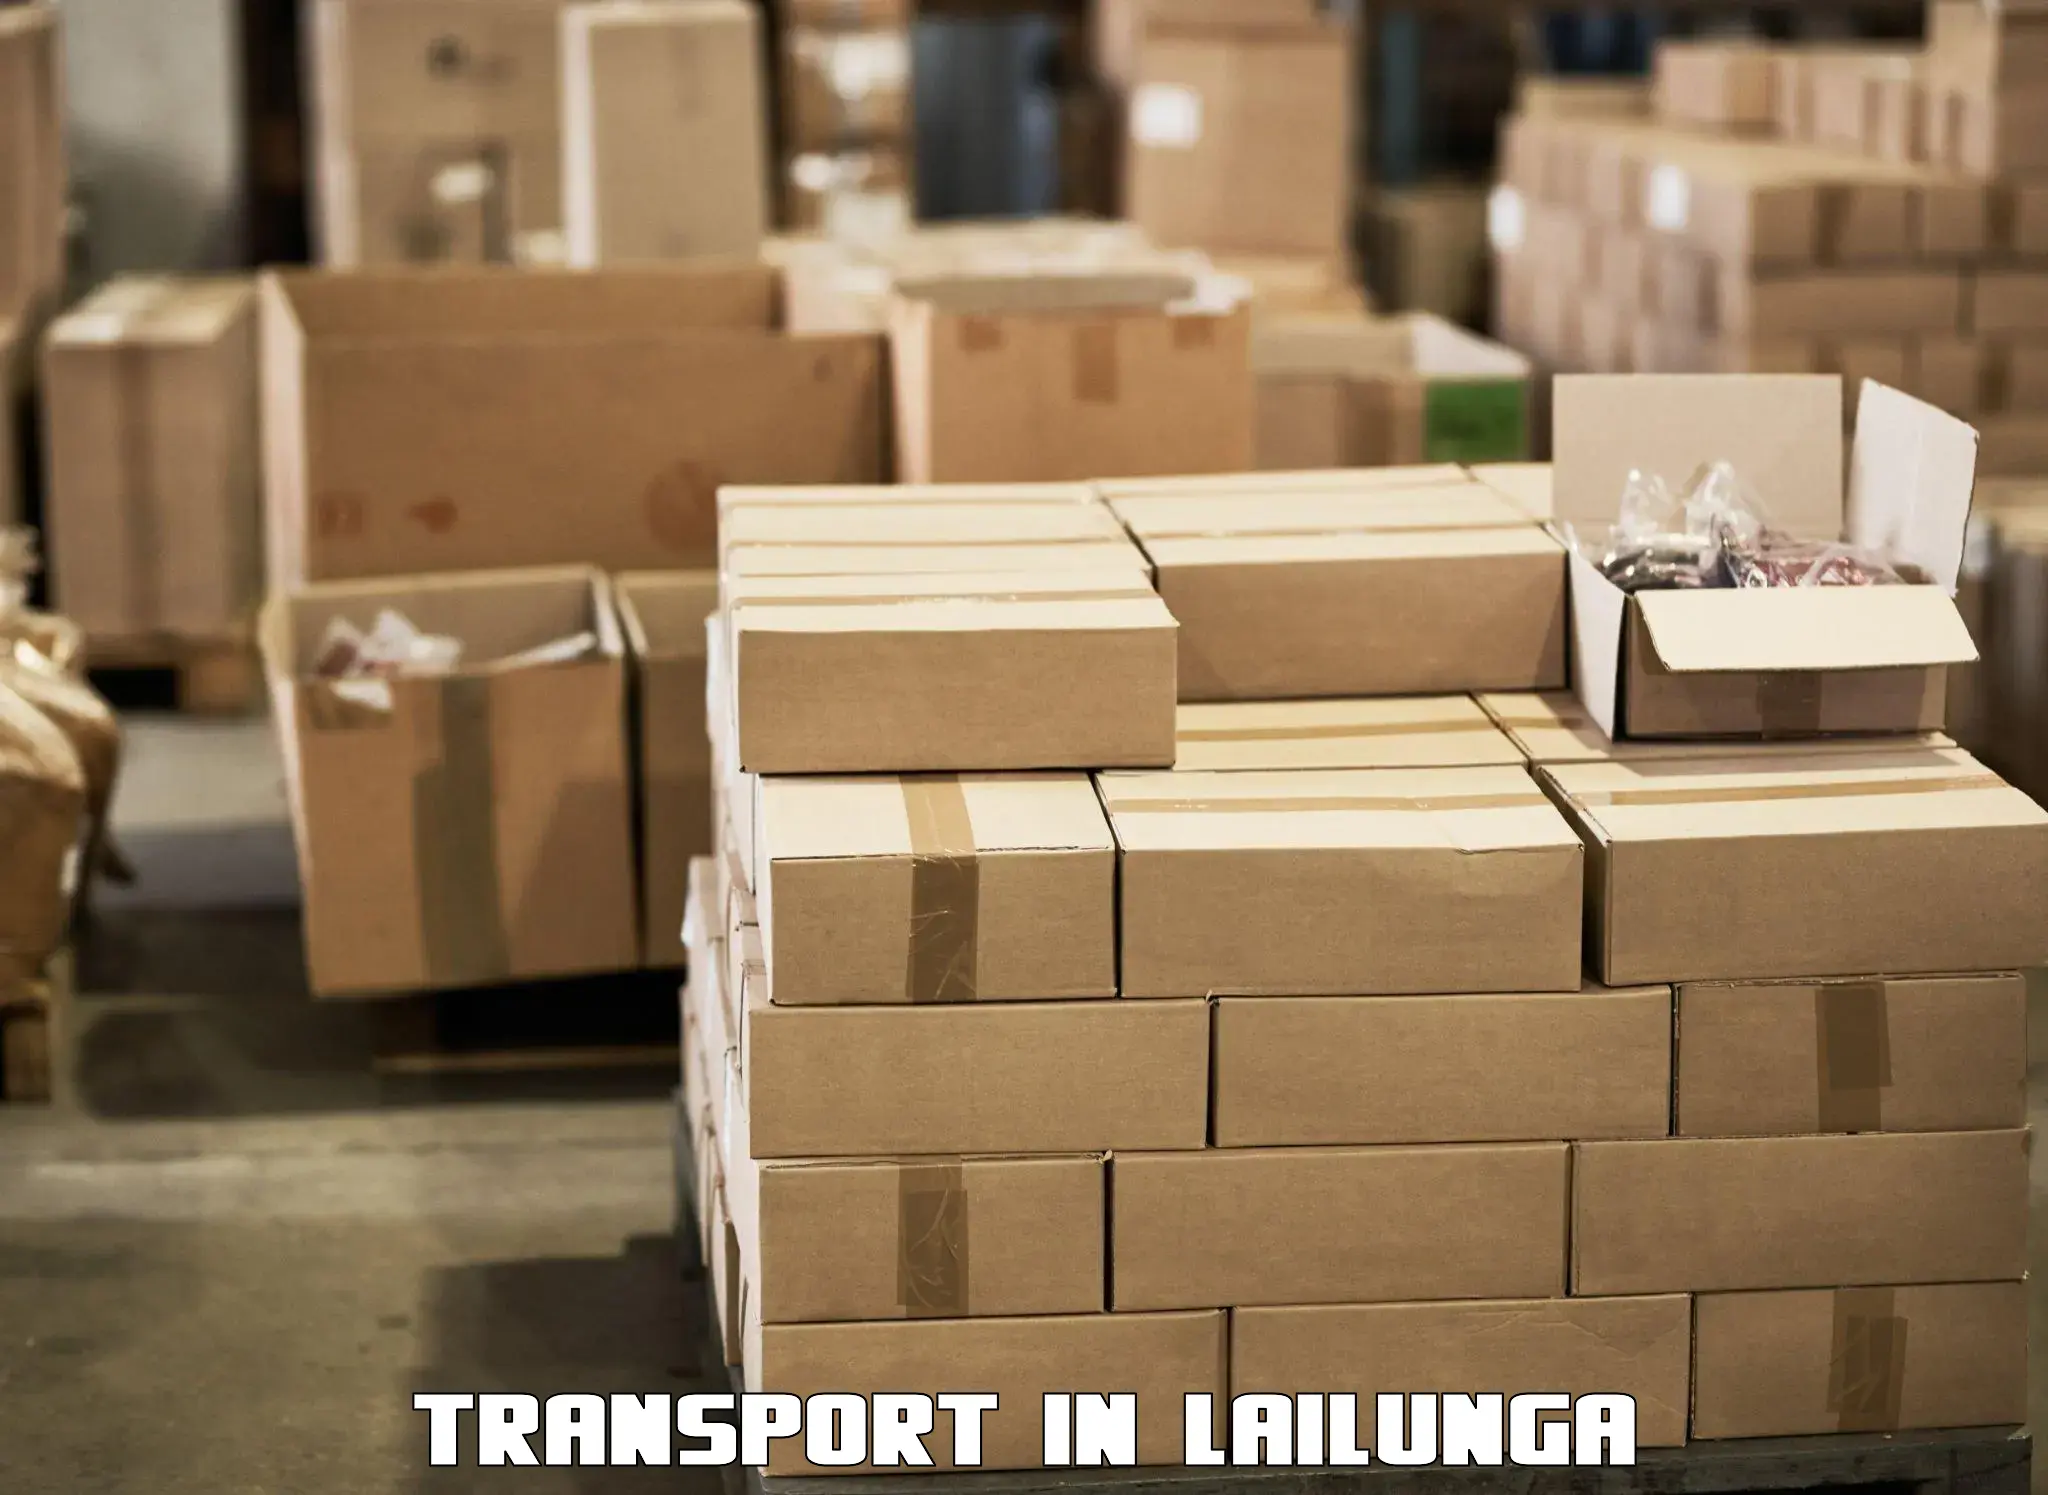 Online transport service in Lailunga